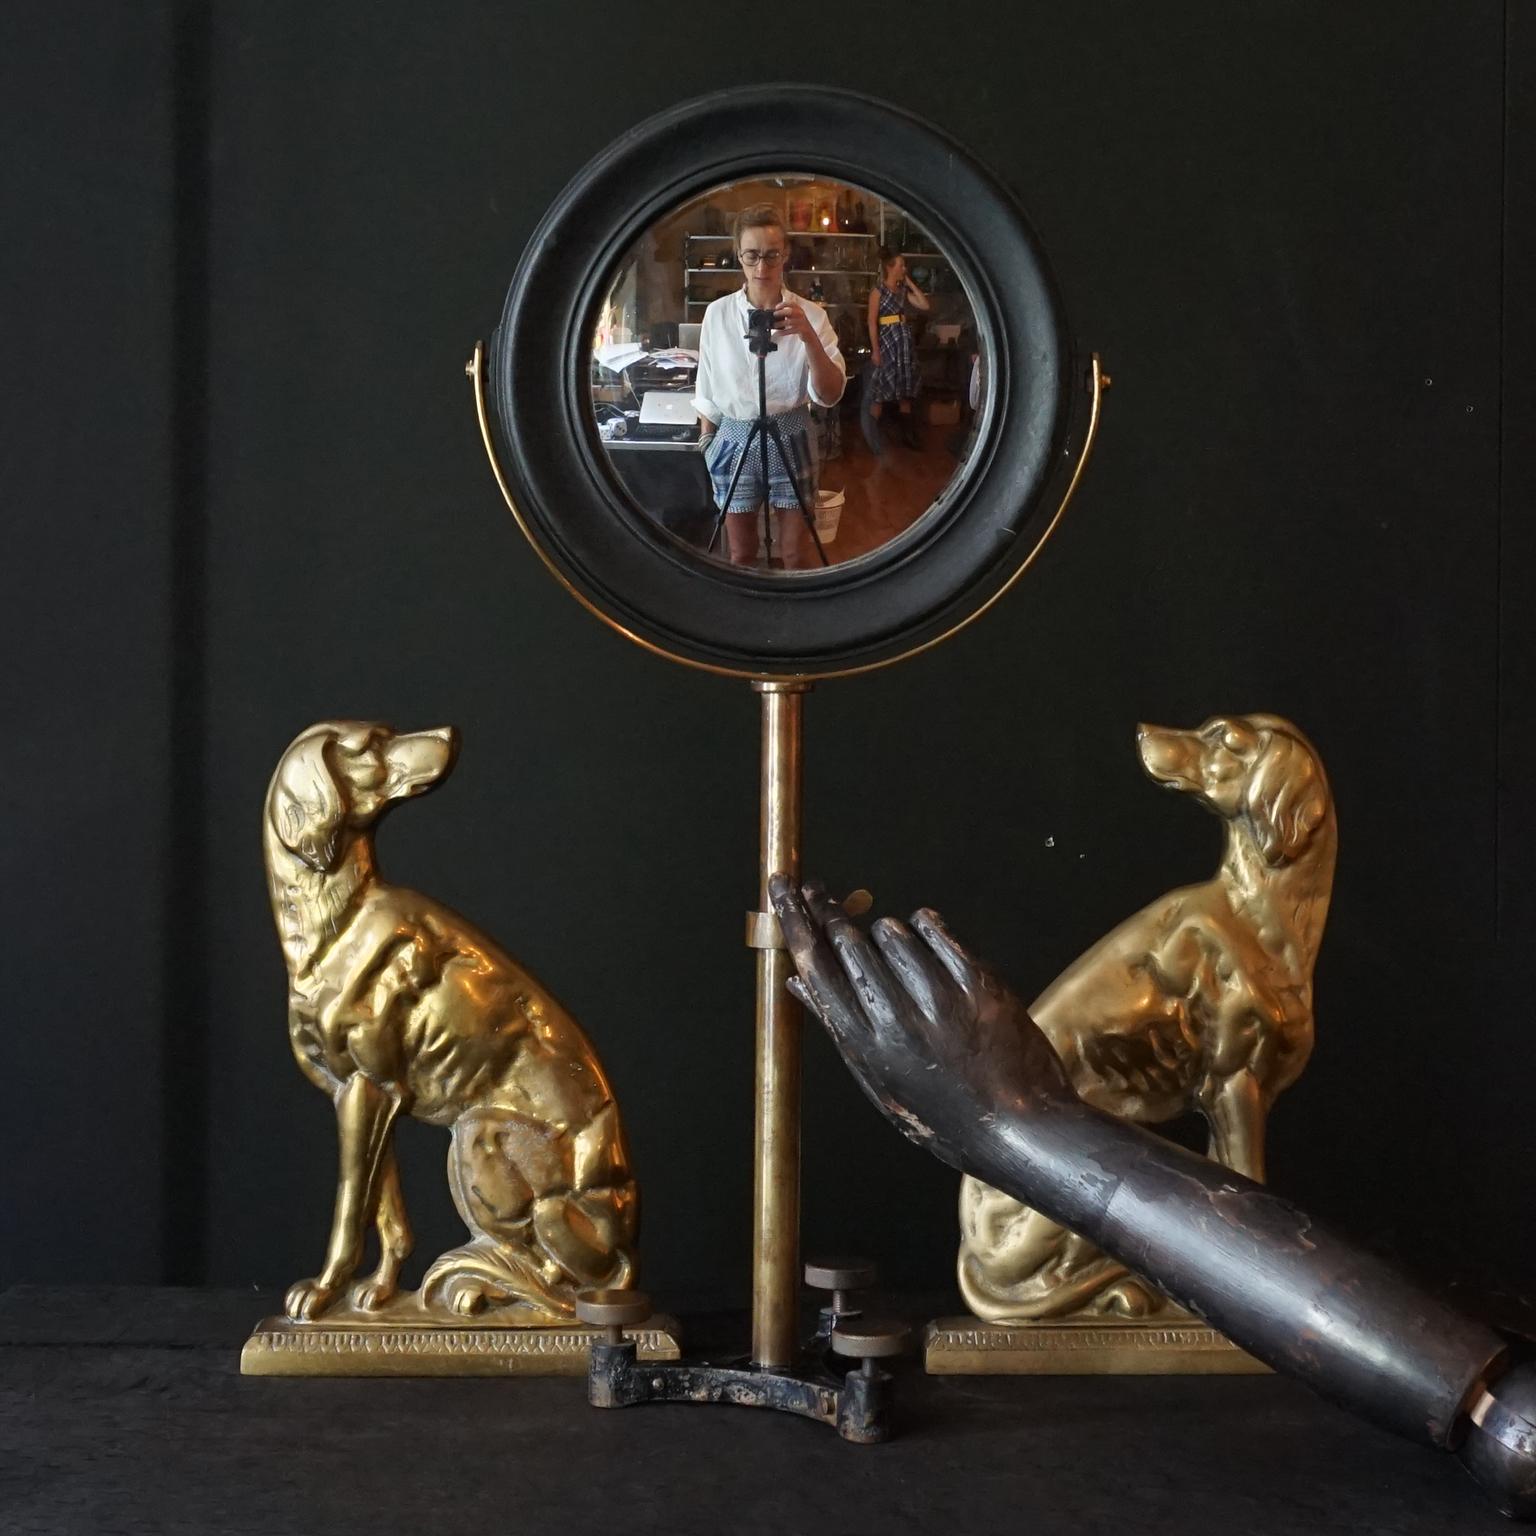 A large 19th Century scientific optical mirror in round blackened hardwood frame on brass articulated tripod stand. The mirror looks concave or convex shaped, but if you look closely is actually flat, the reflection however is not like a regular